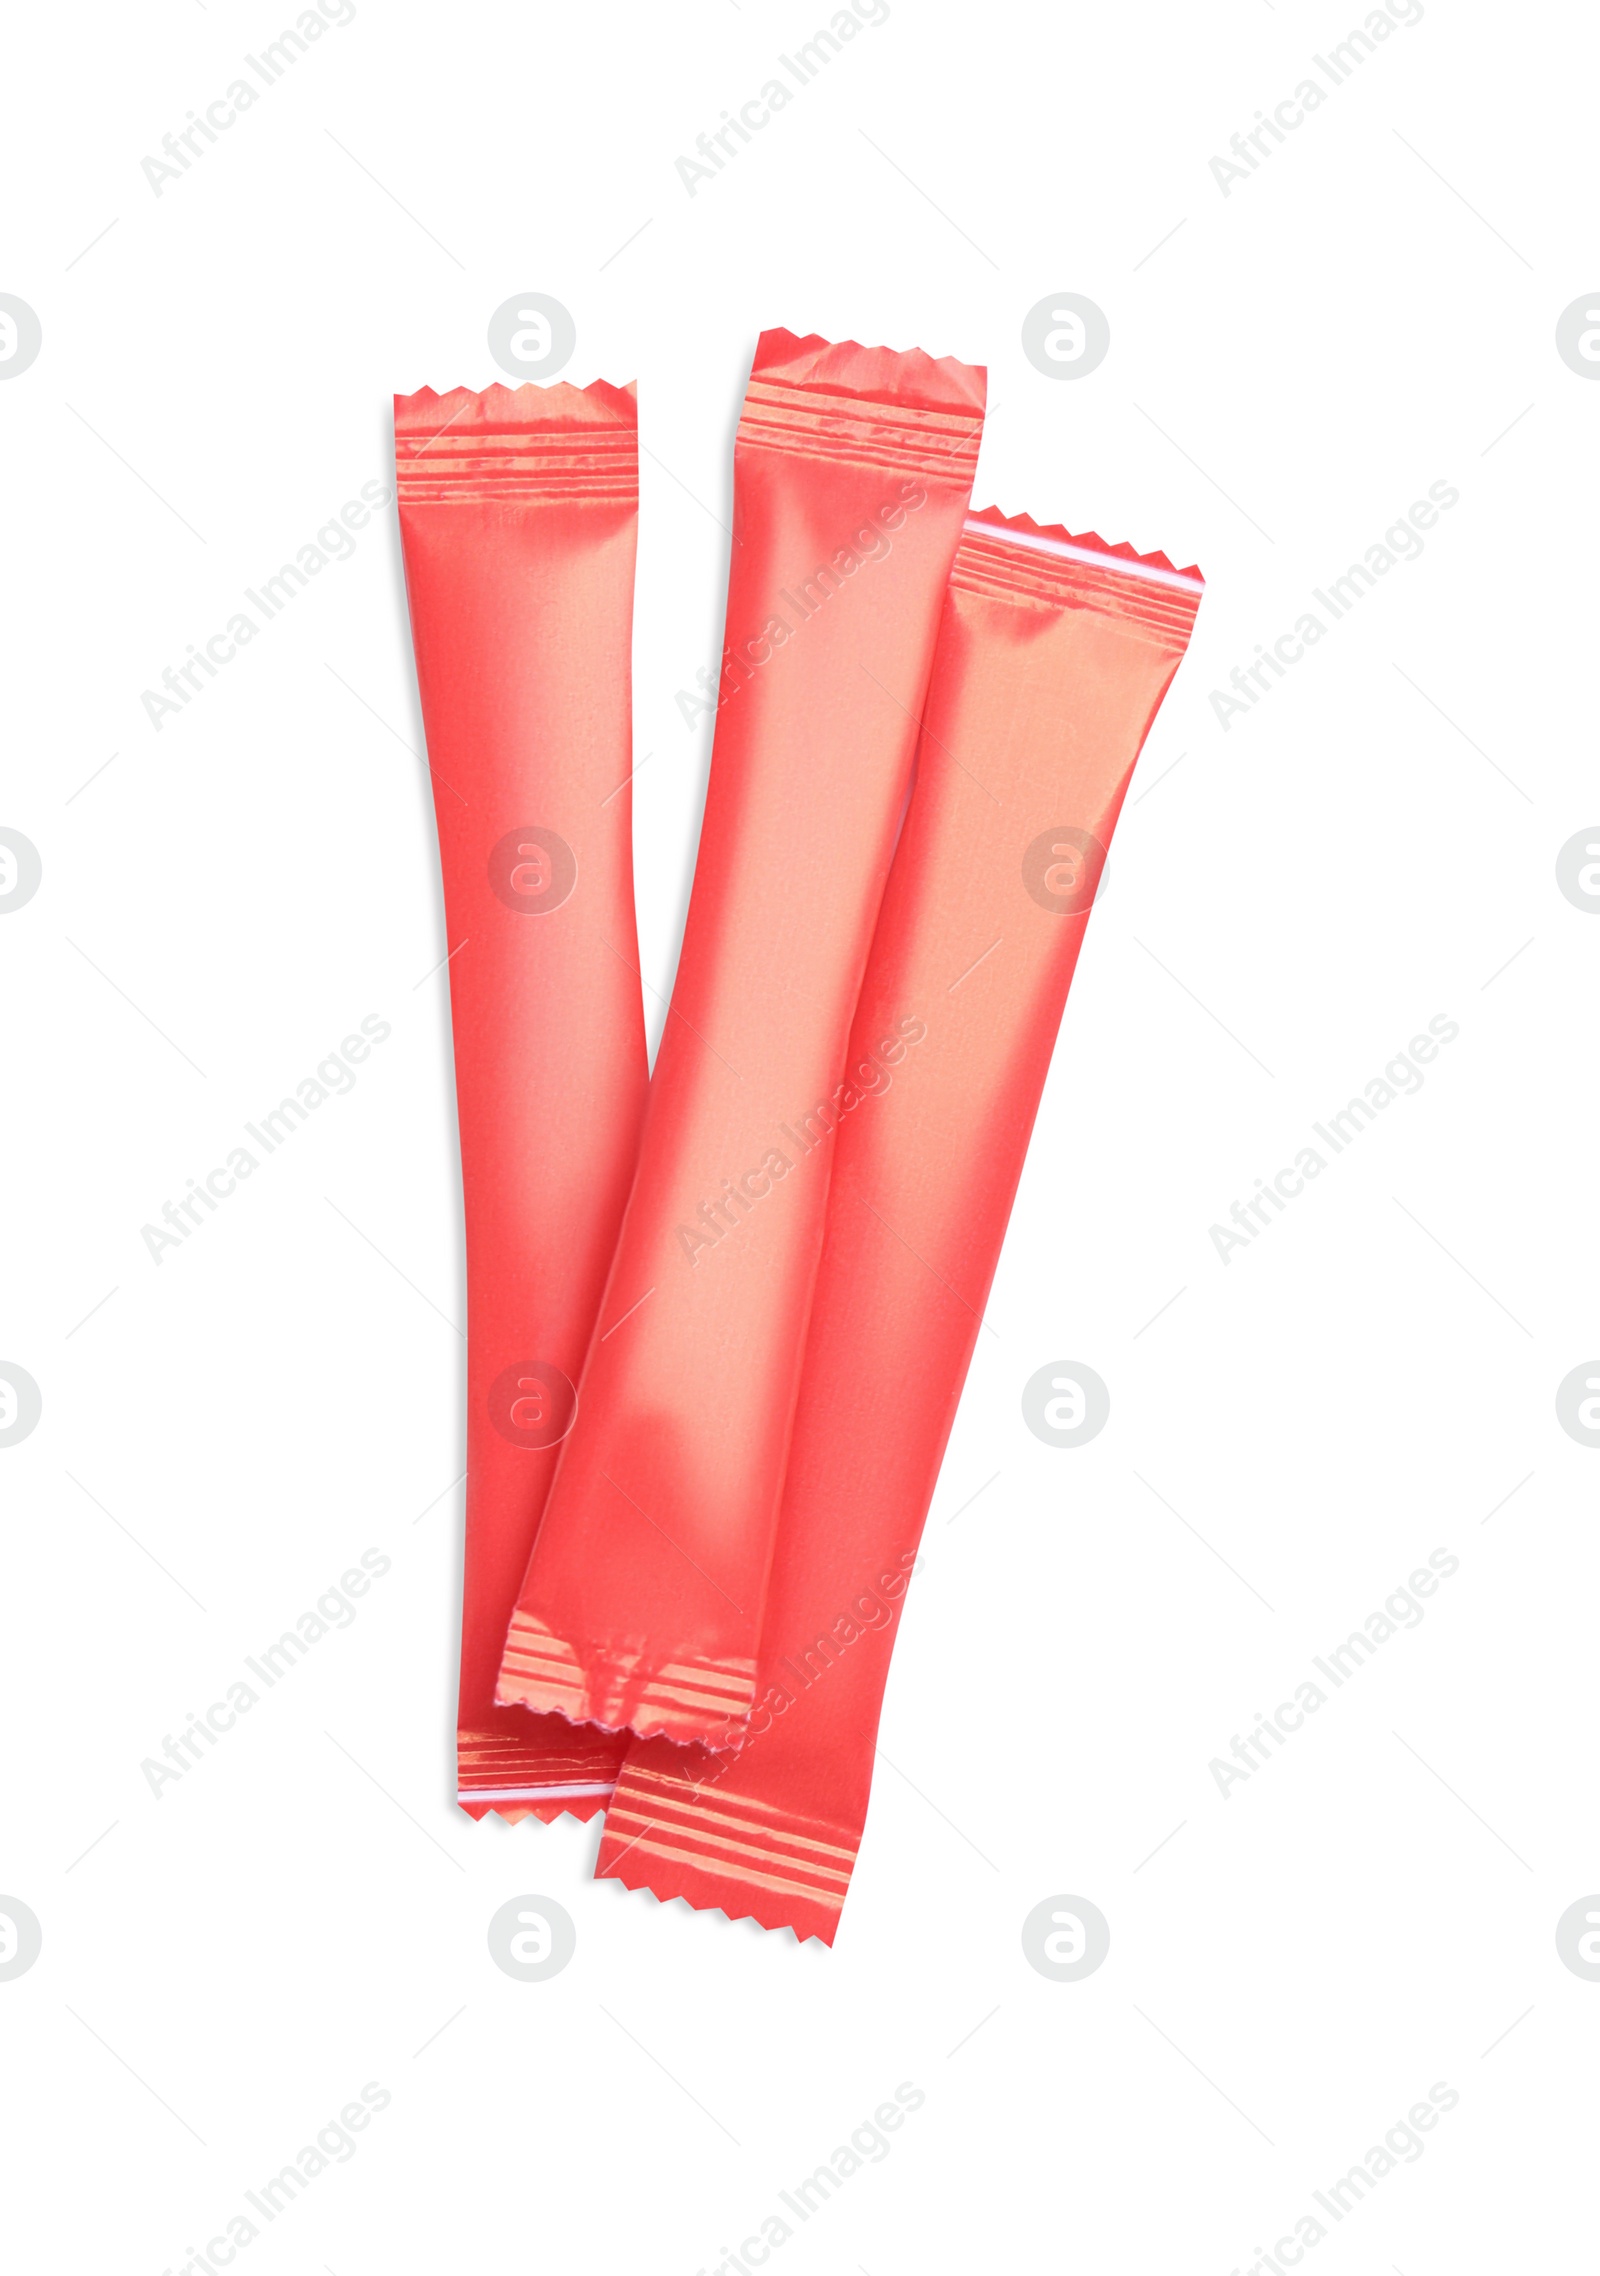 Photo of Red sticks of sugar on white background, top view